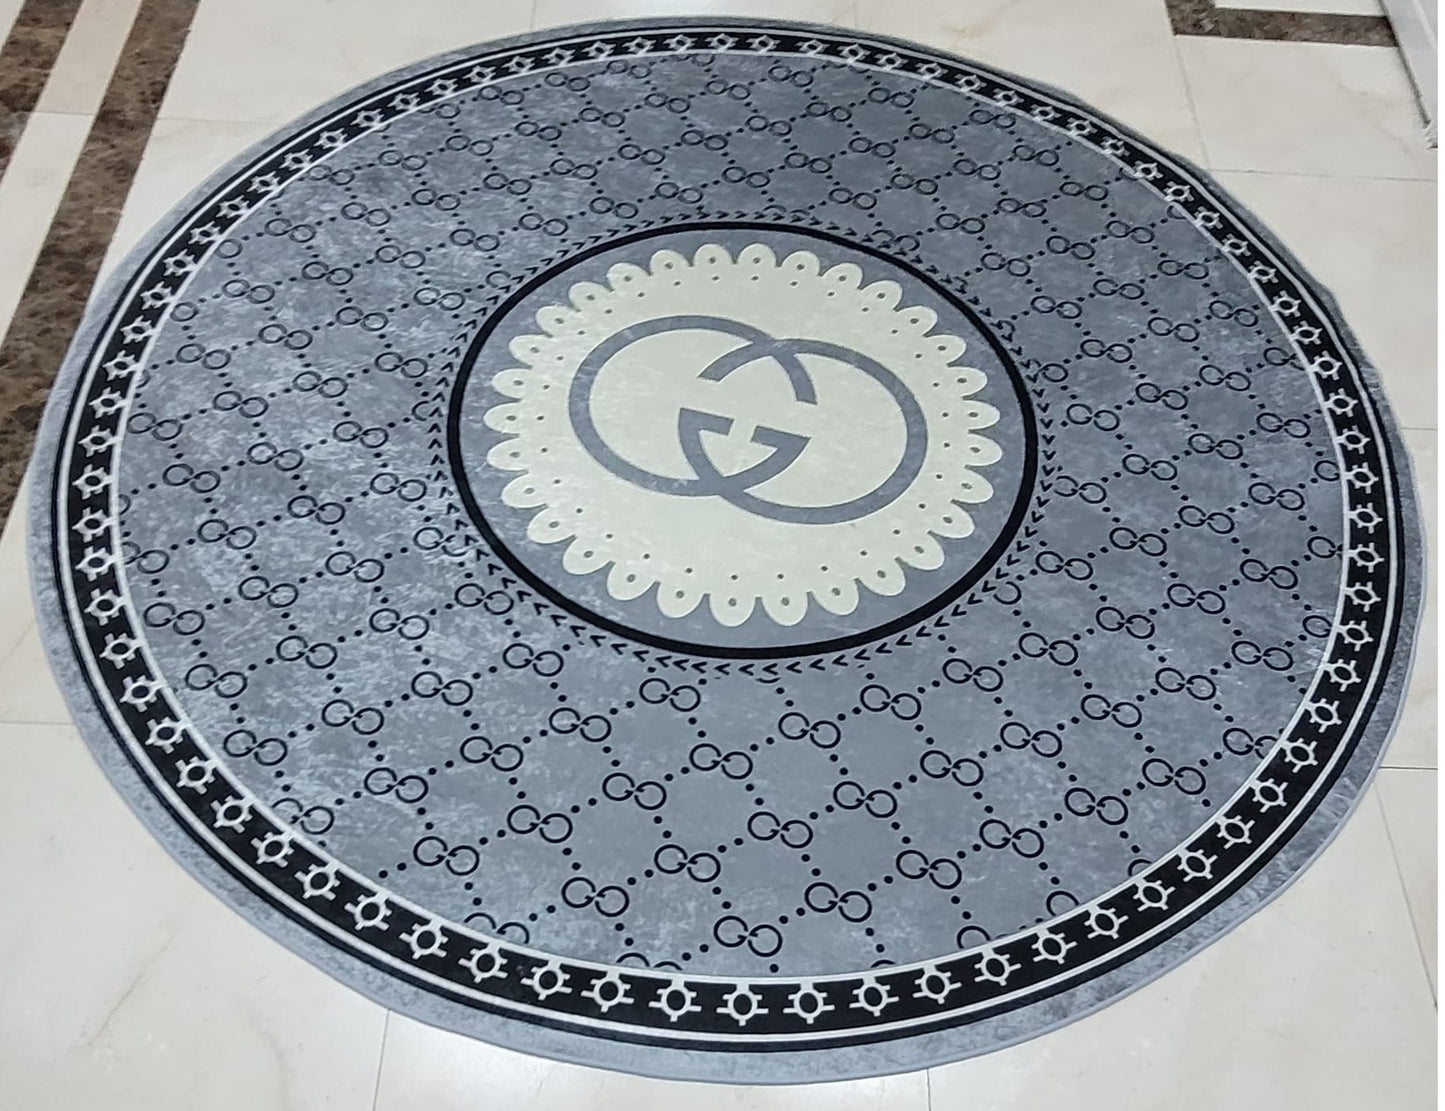 Brand New Crystal  carpet - Circular - Anti slip with Quality specifications 200 x 200cm►6.56 x 6.56ft